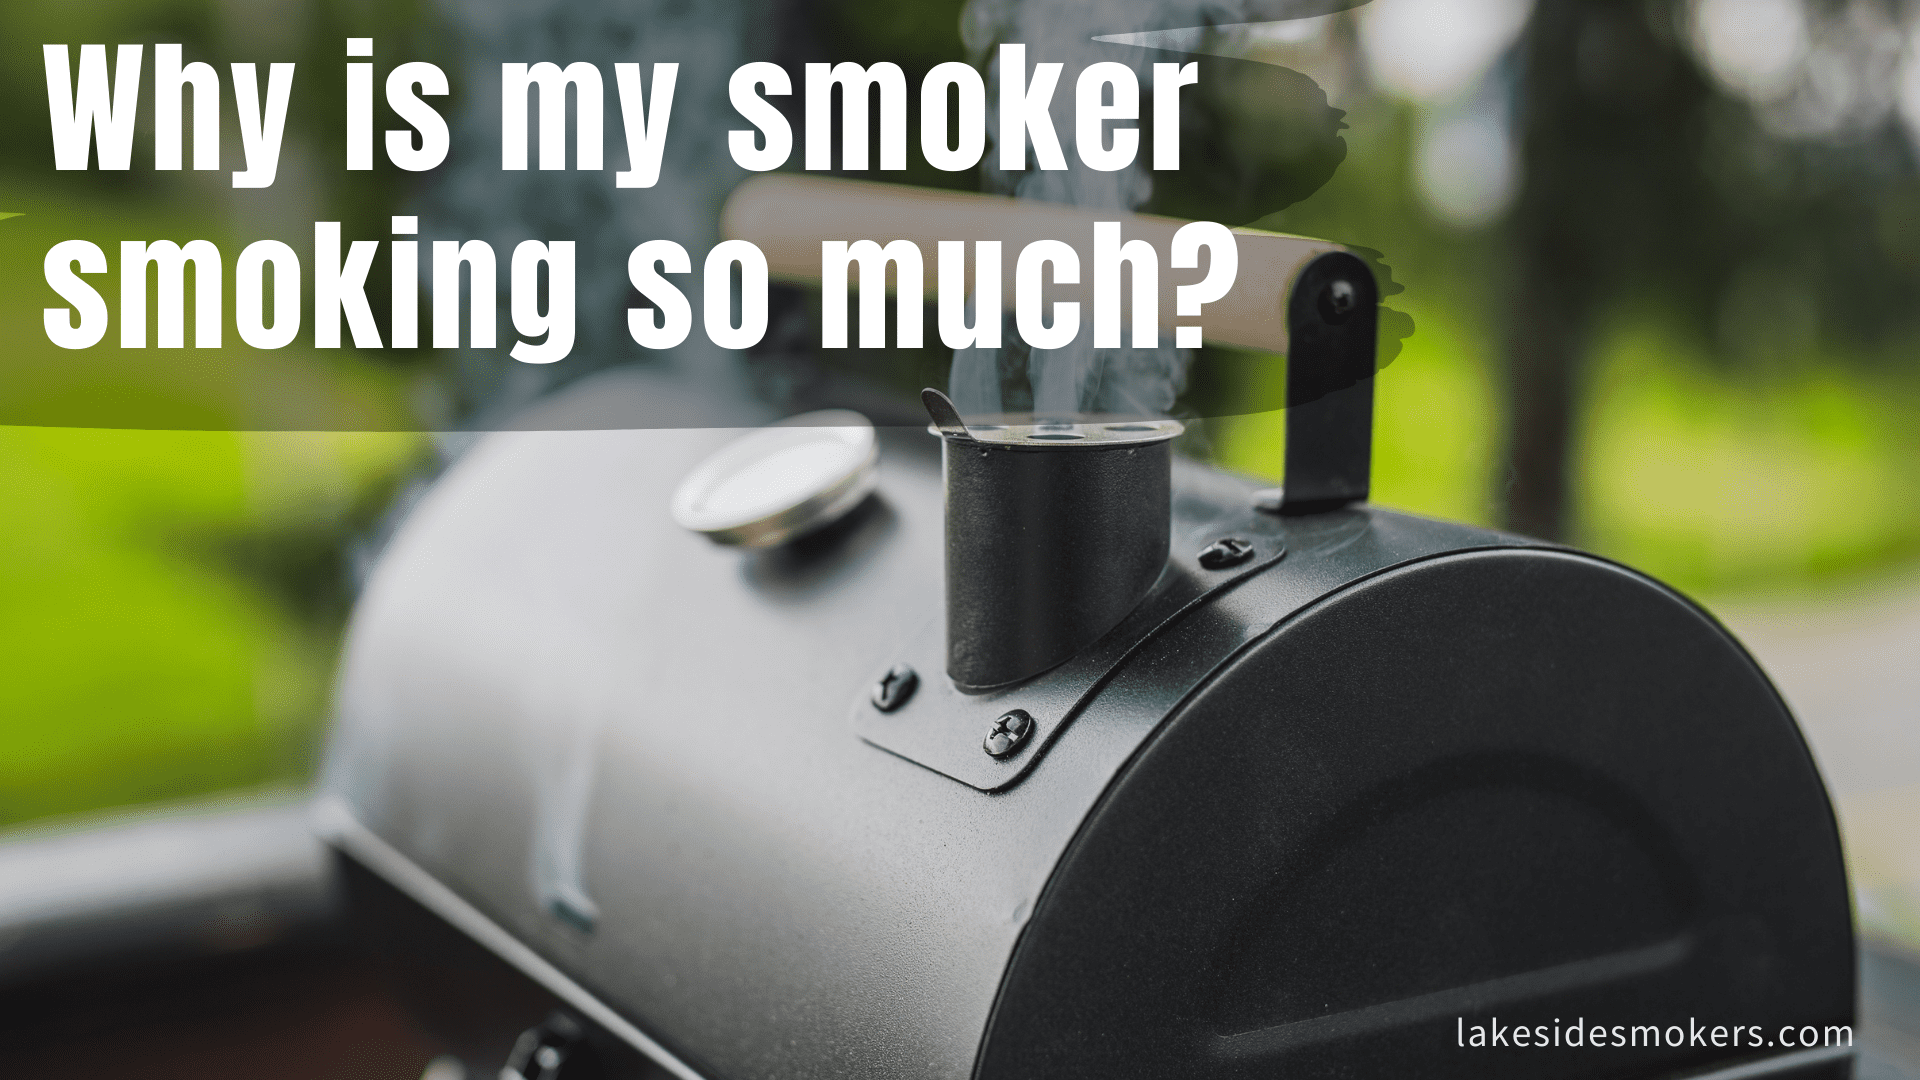 Why is my smoker smoking so much? [+ways to deal with it]